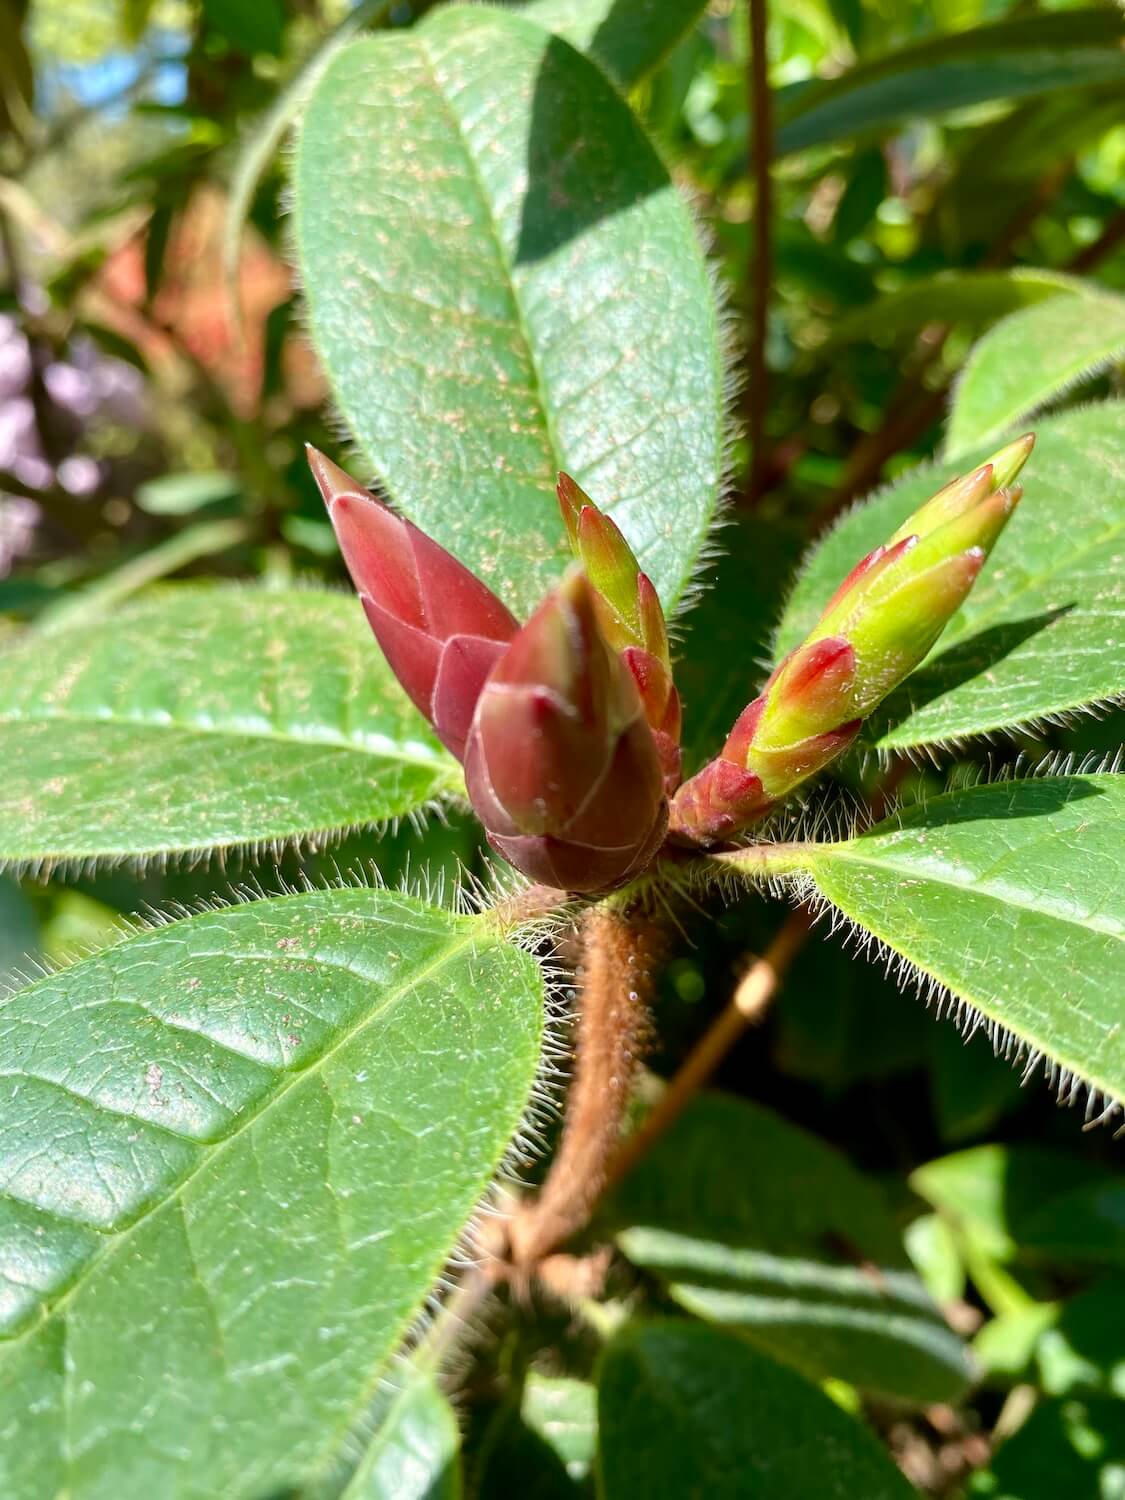 Rhododendron blooms begin pushing out on this photo of the start of the flower.  The buds are red and green and still very tight.  They are surrounded by waxy green leaves with fur like needles on the edges. 